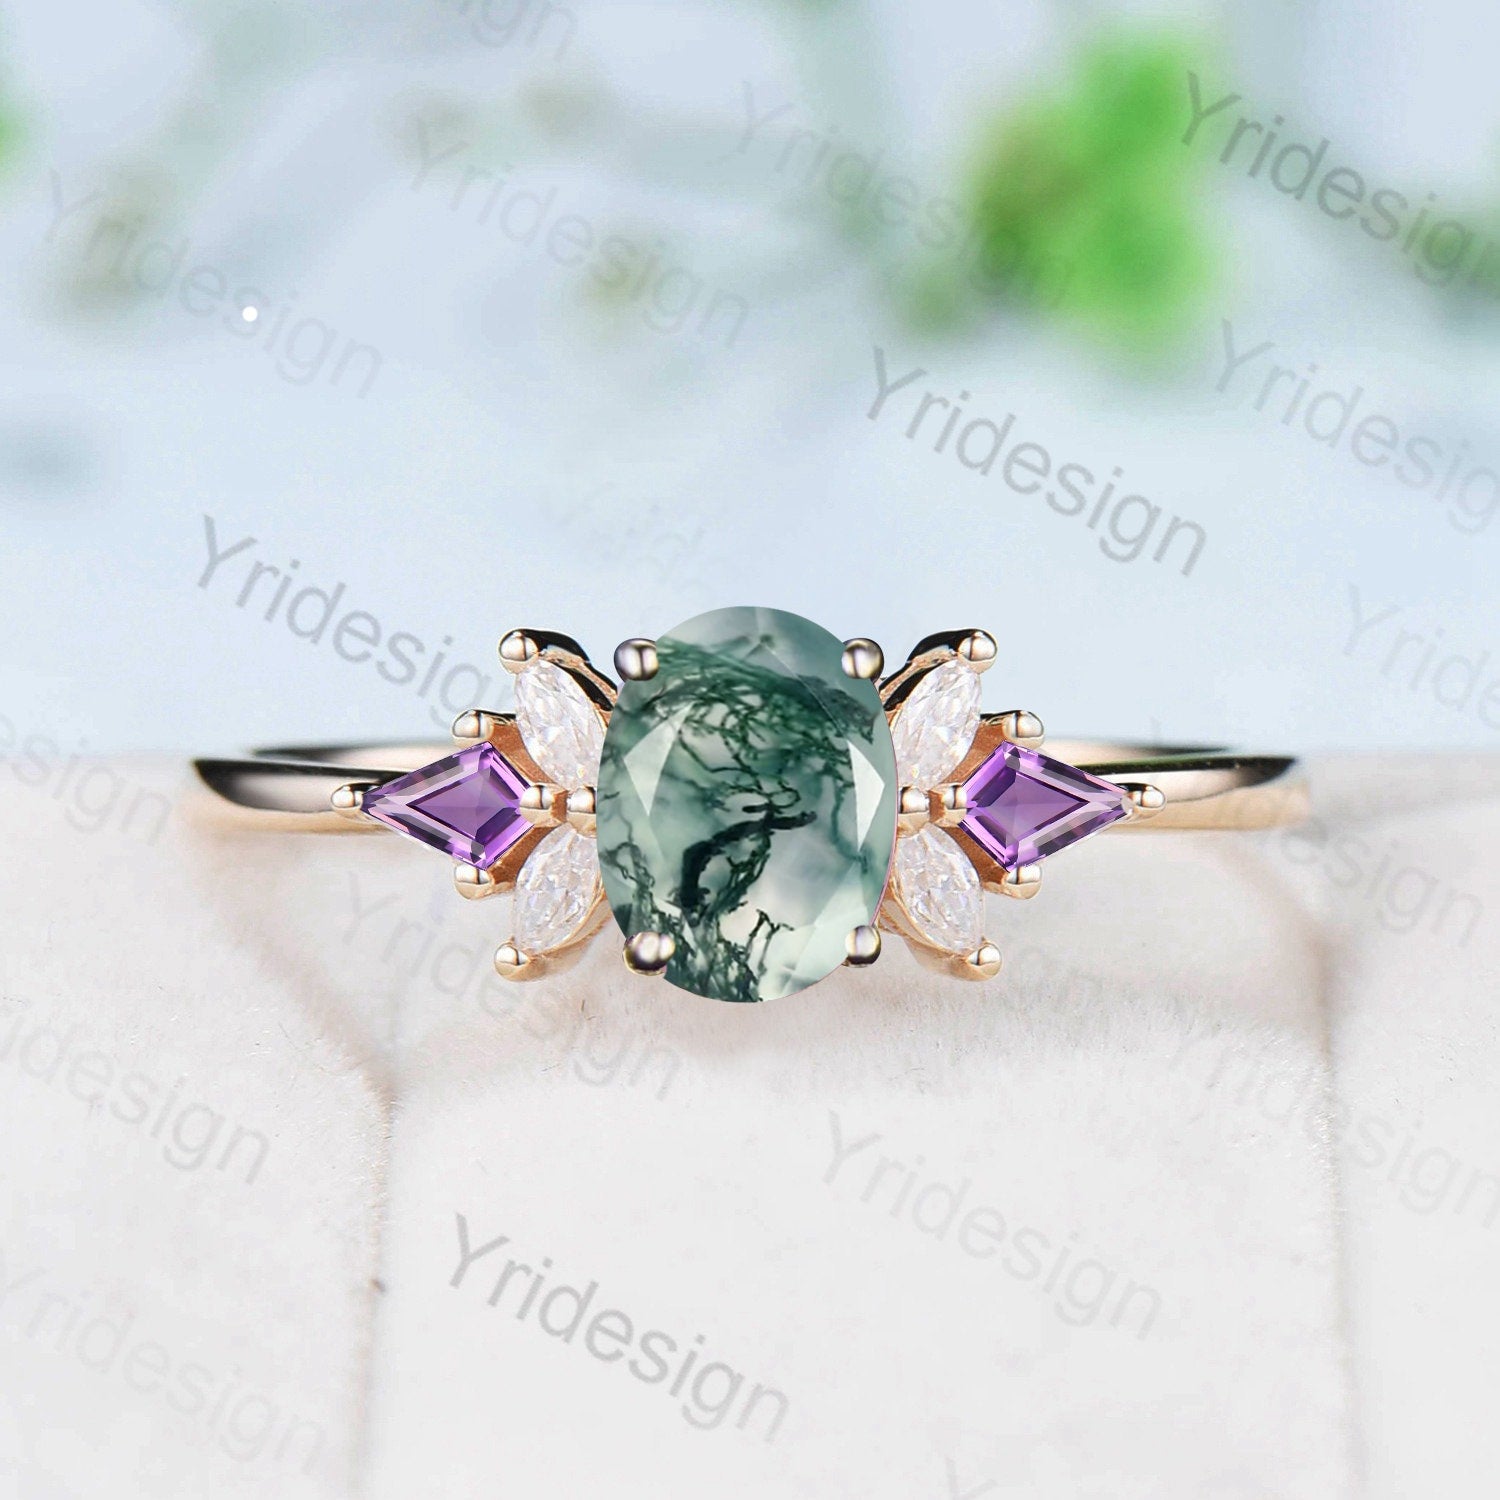 Oval Moss agate engagement ring vintage unique Cluster yellow gold engagement ring women kite moissanite wedding Bridal art deco Anniversary - PENFINE